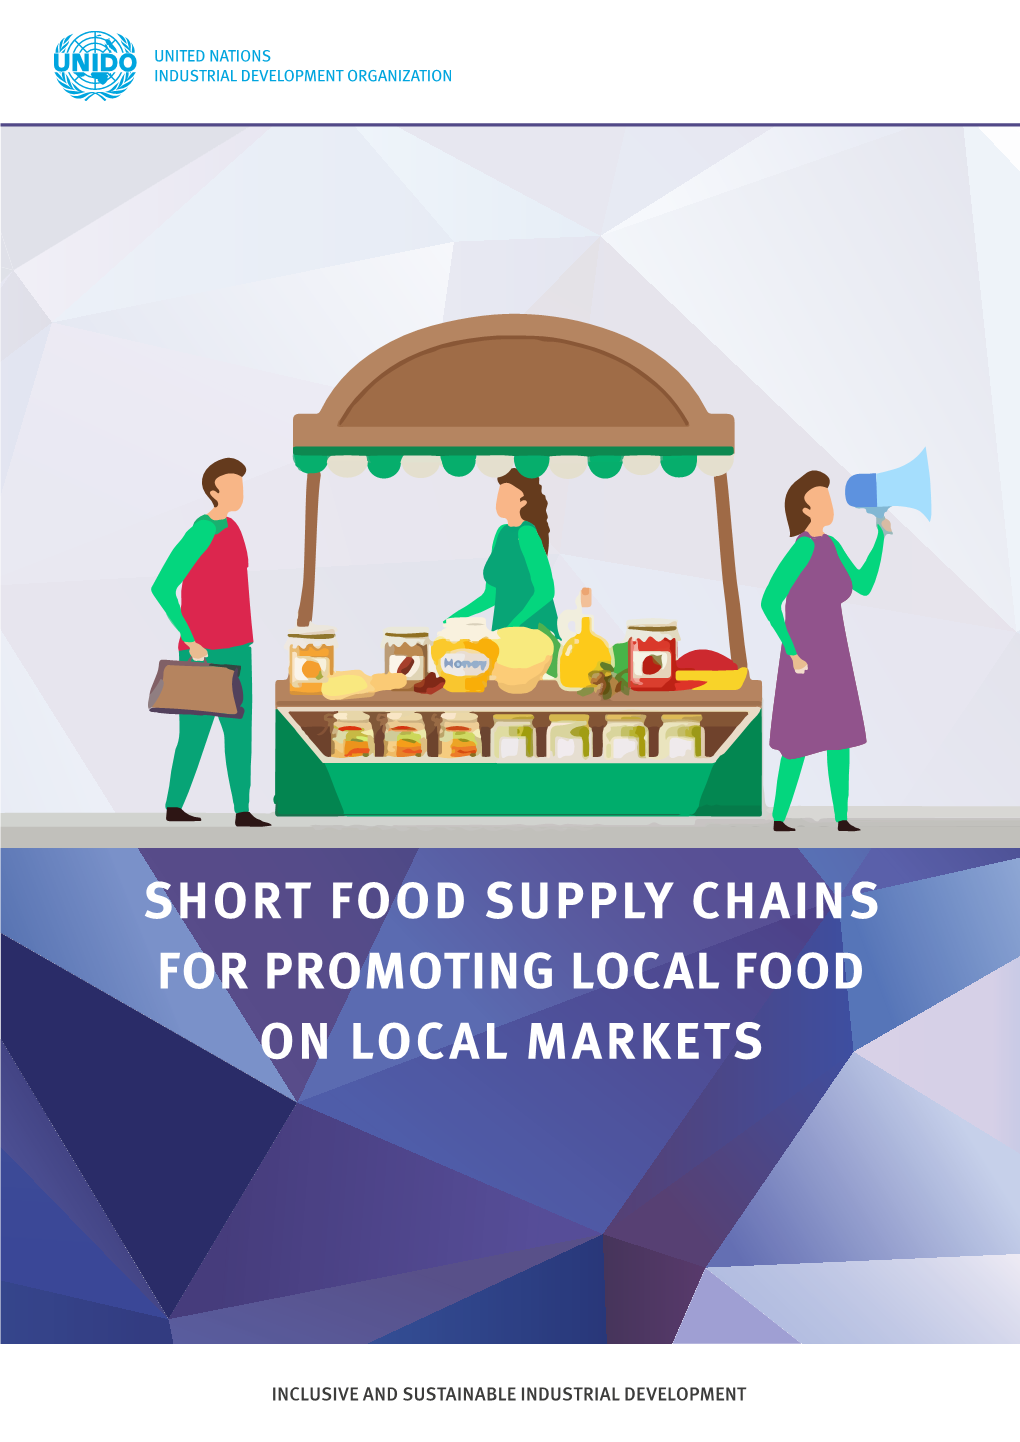 Short Food Supply Chains for Promoting Local Food on Local Markets